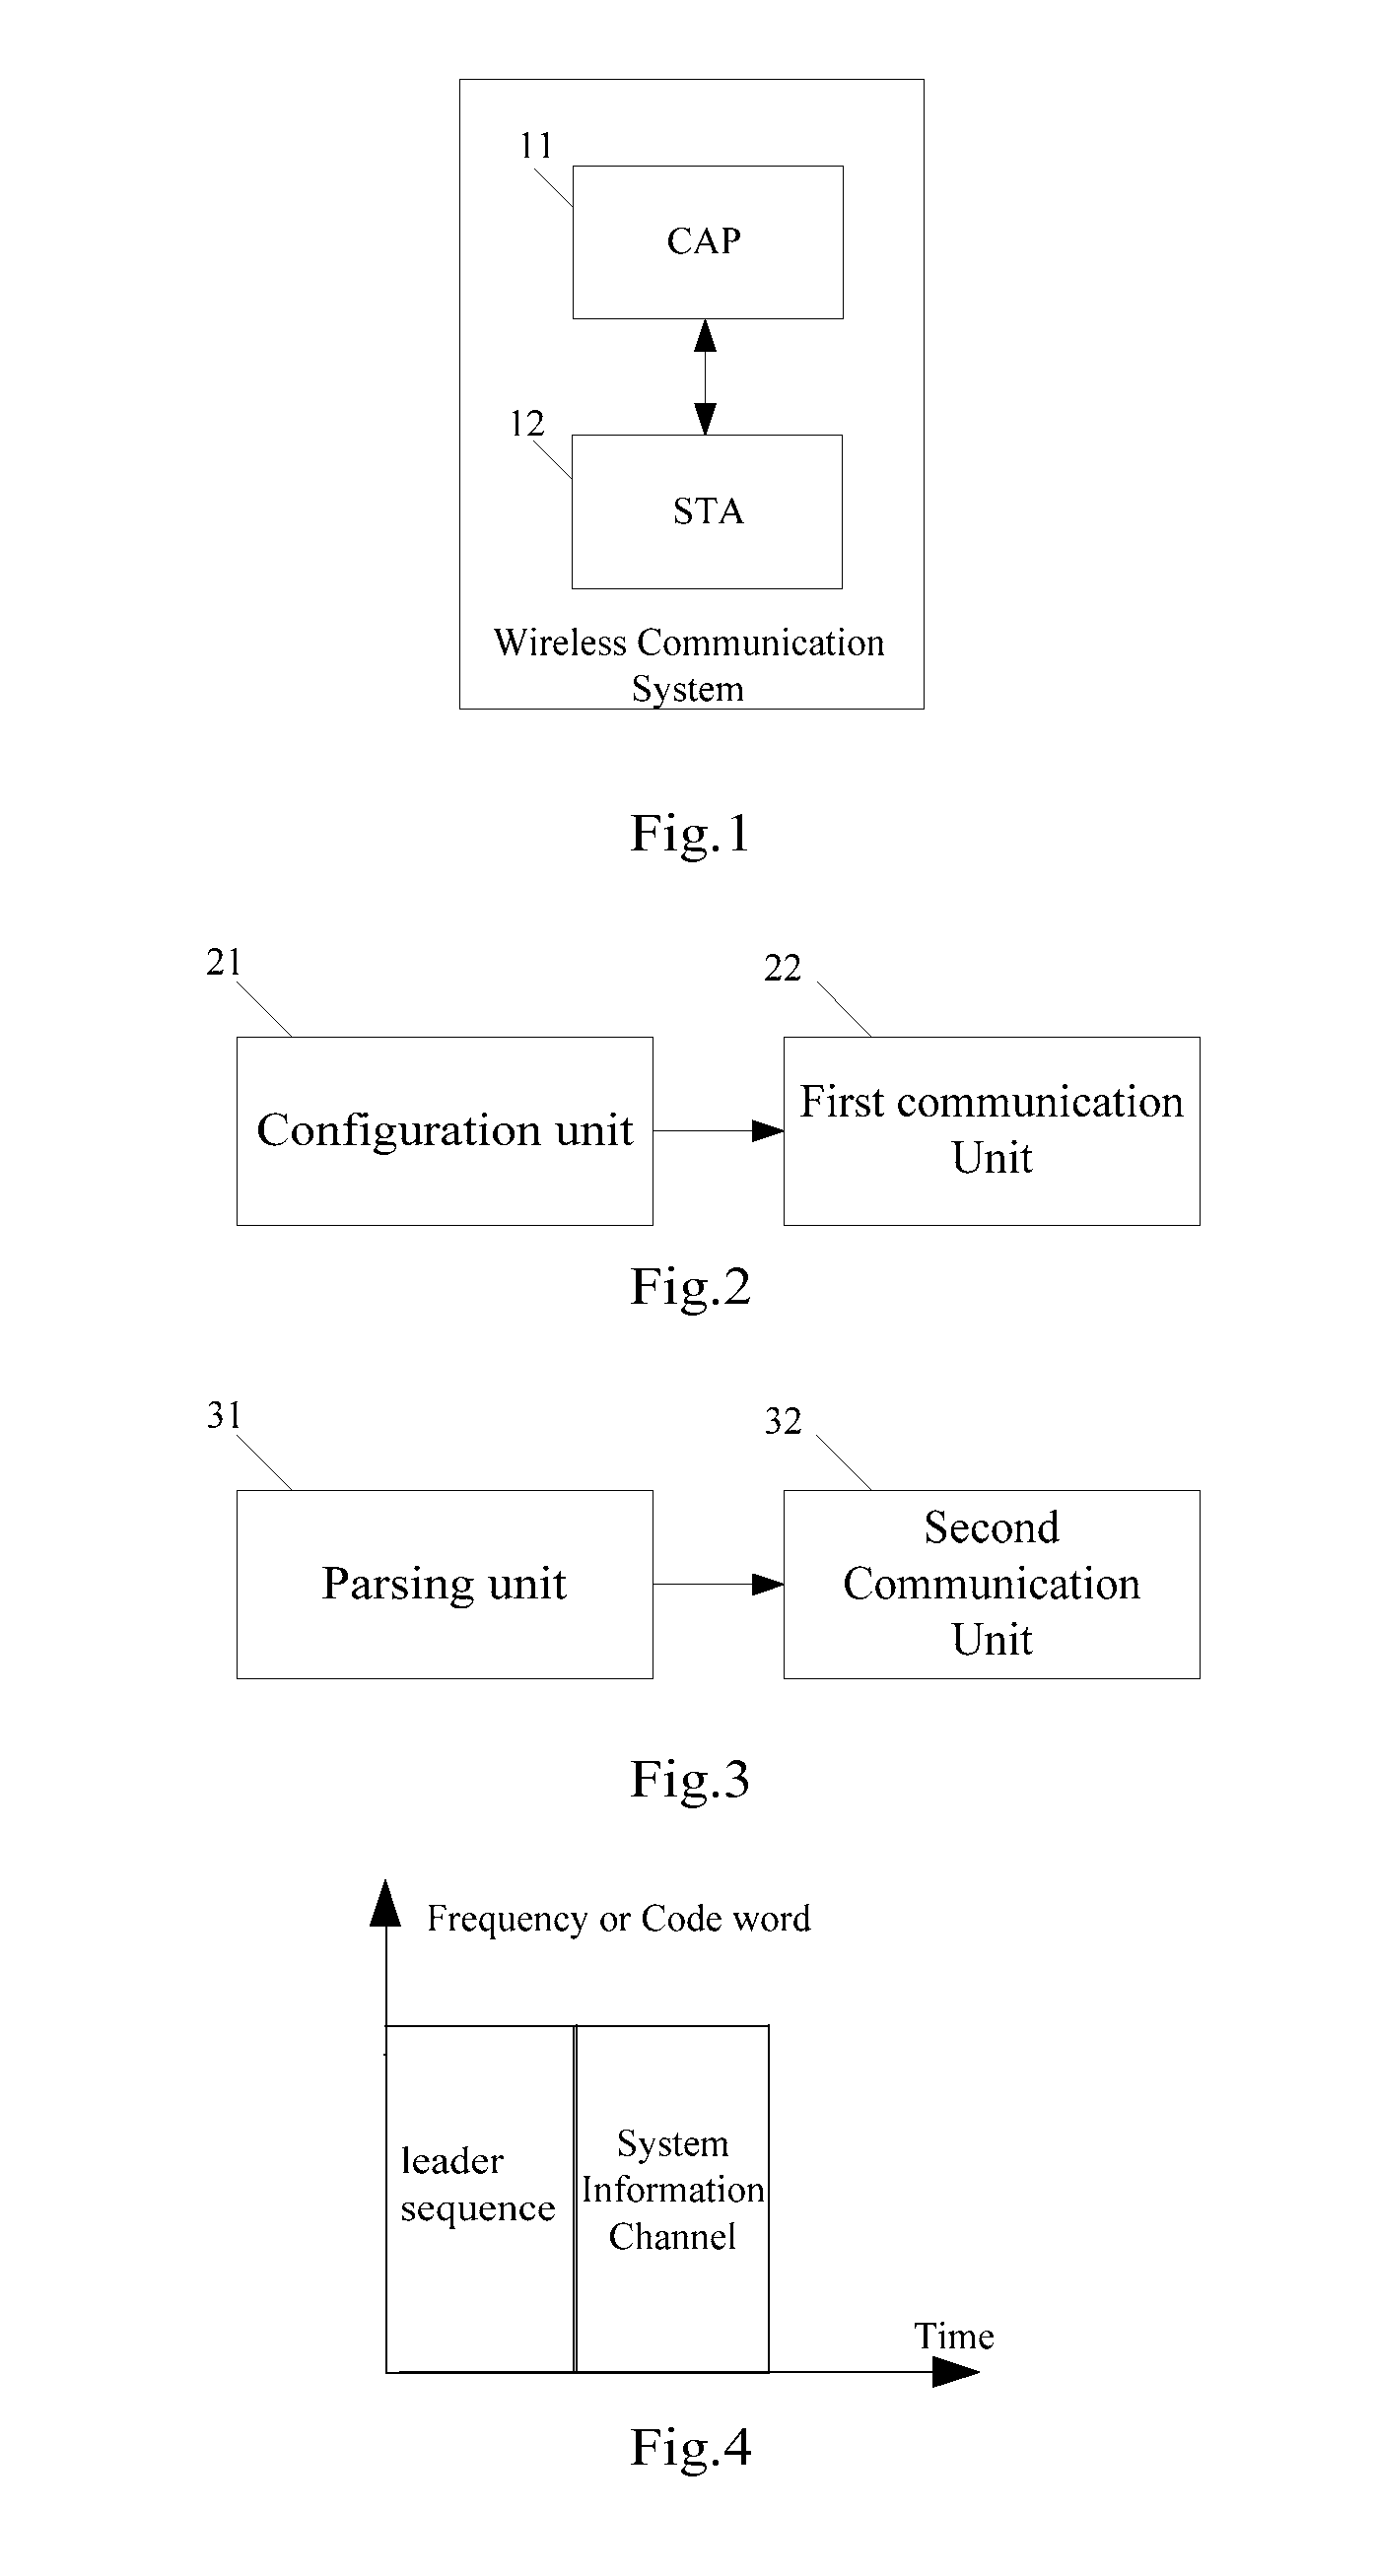 Wireless Communication System, Network Device, and Terminal Device